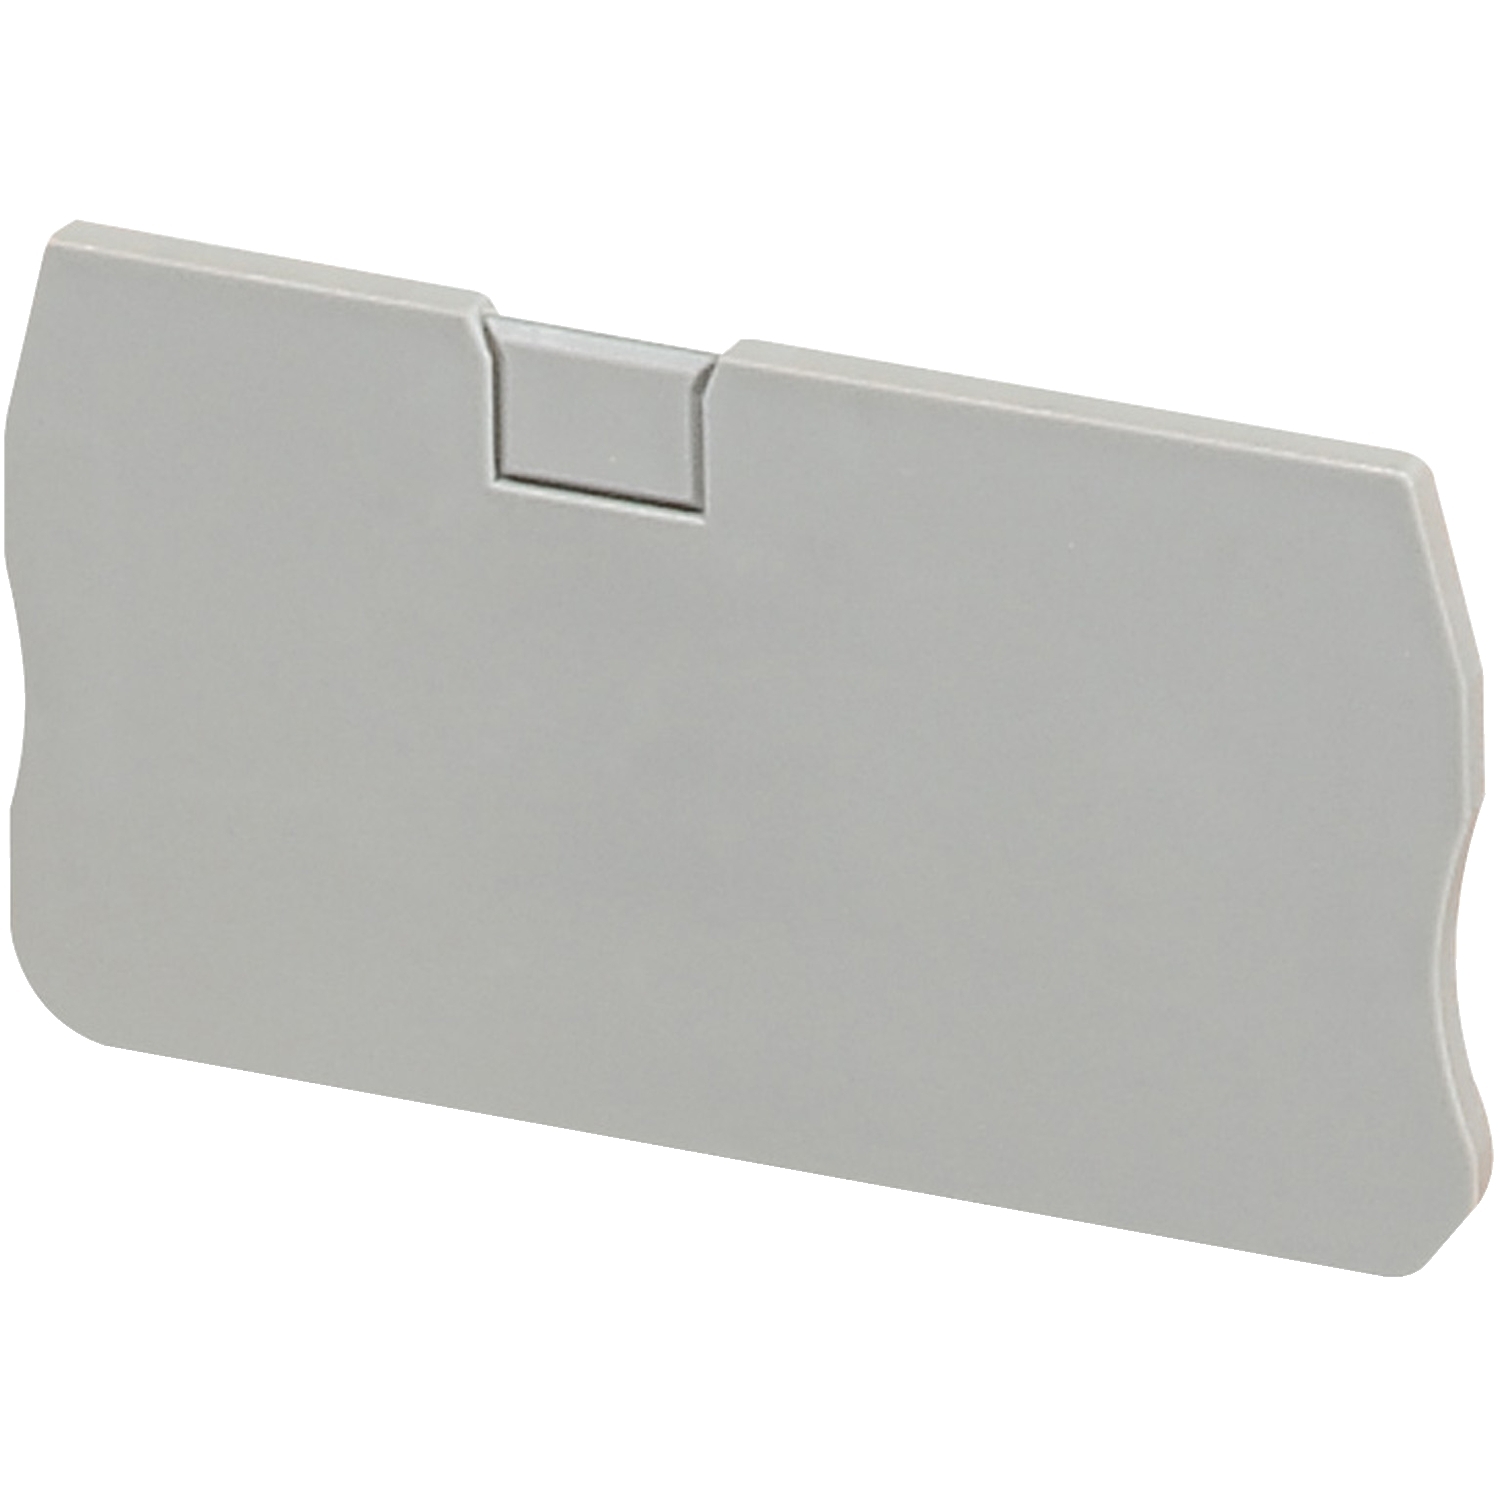 Cover plate, Linergy TR, 2 points, 2.2mm width, for spring terminals NSYTRR42, 4mm², grey, Set of 50